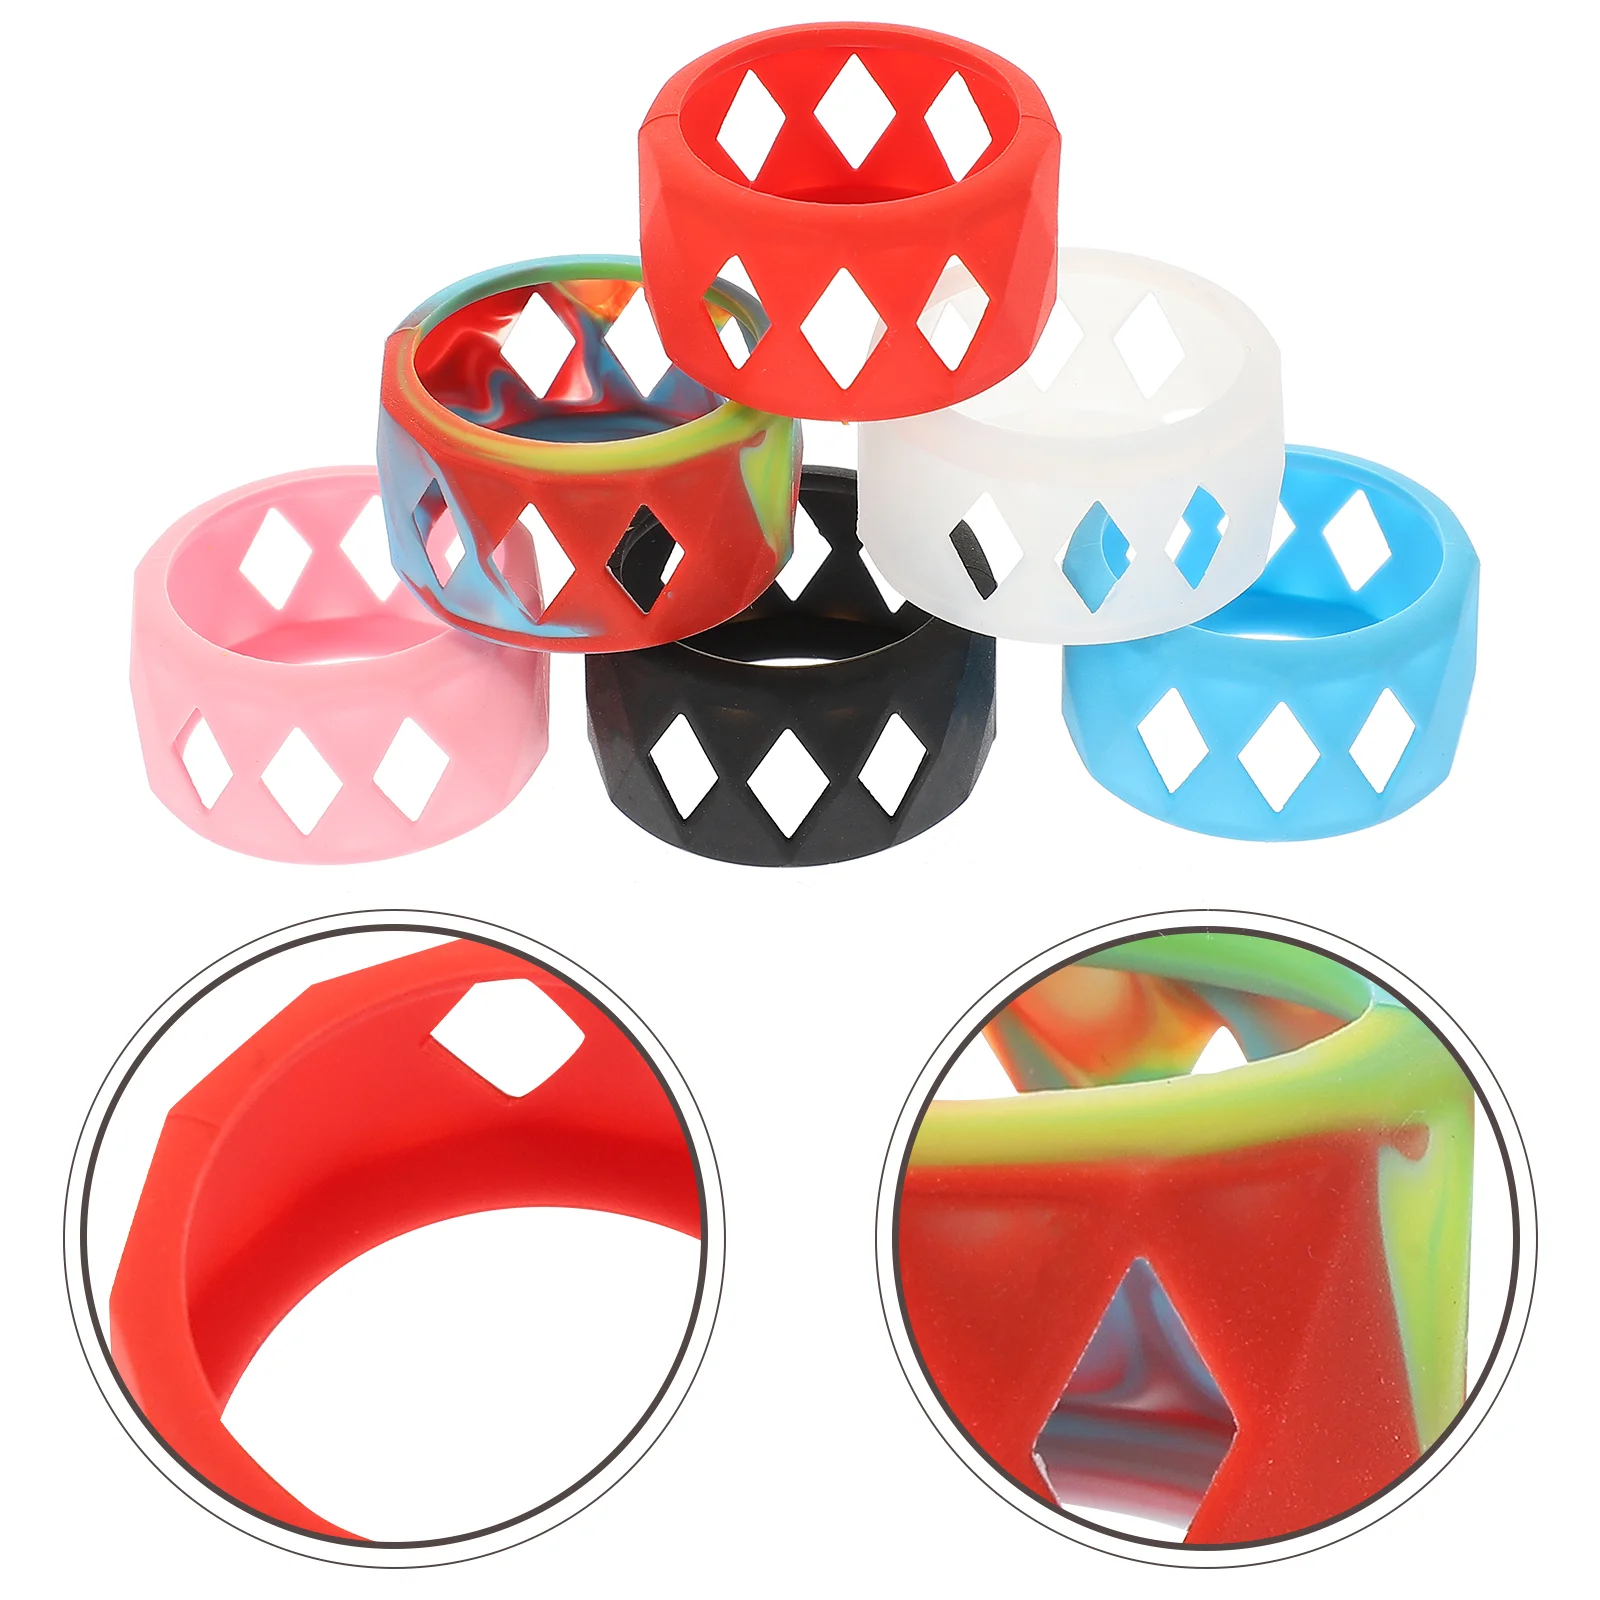 

Sleeve Ring Silicone Non Skidhollow Out Protection Soft Antisupple Band Sleeves